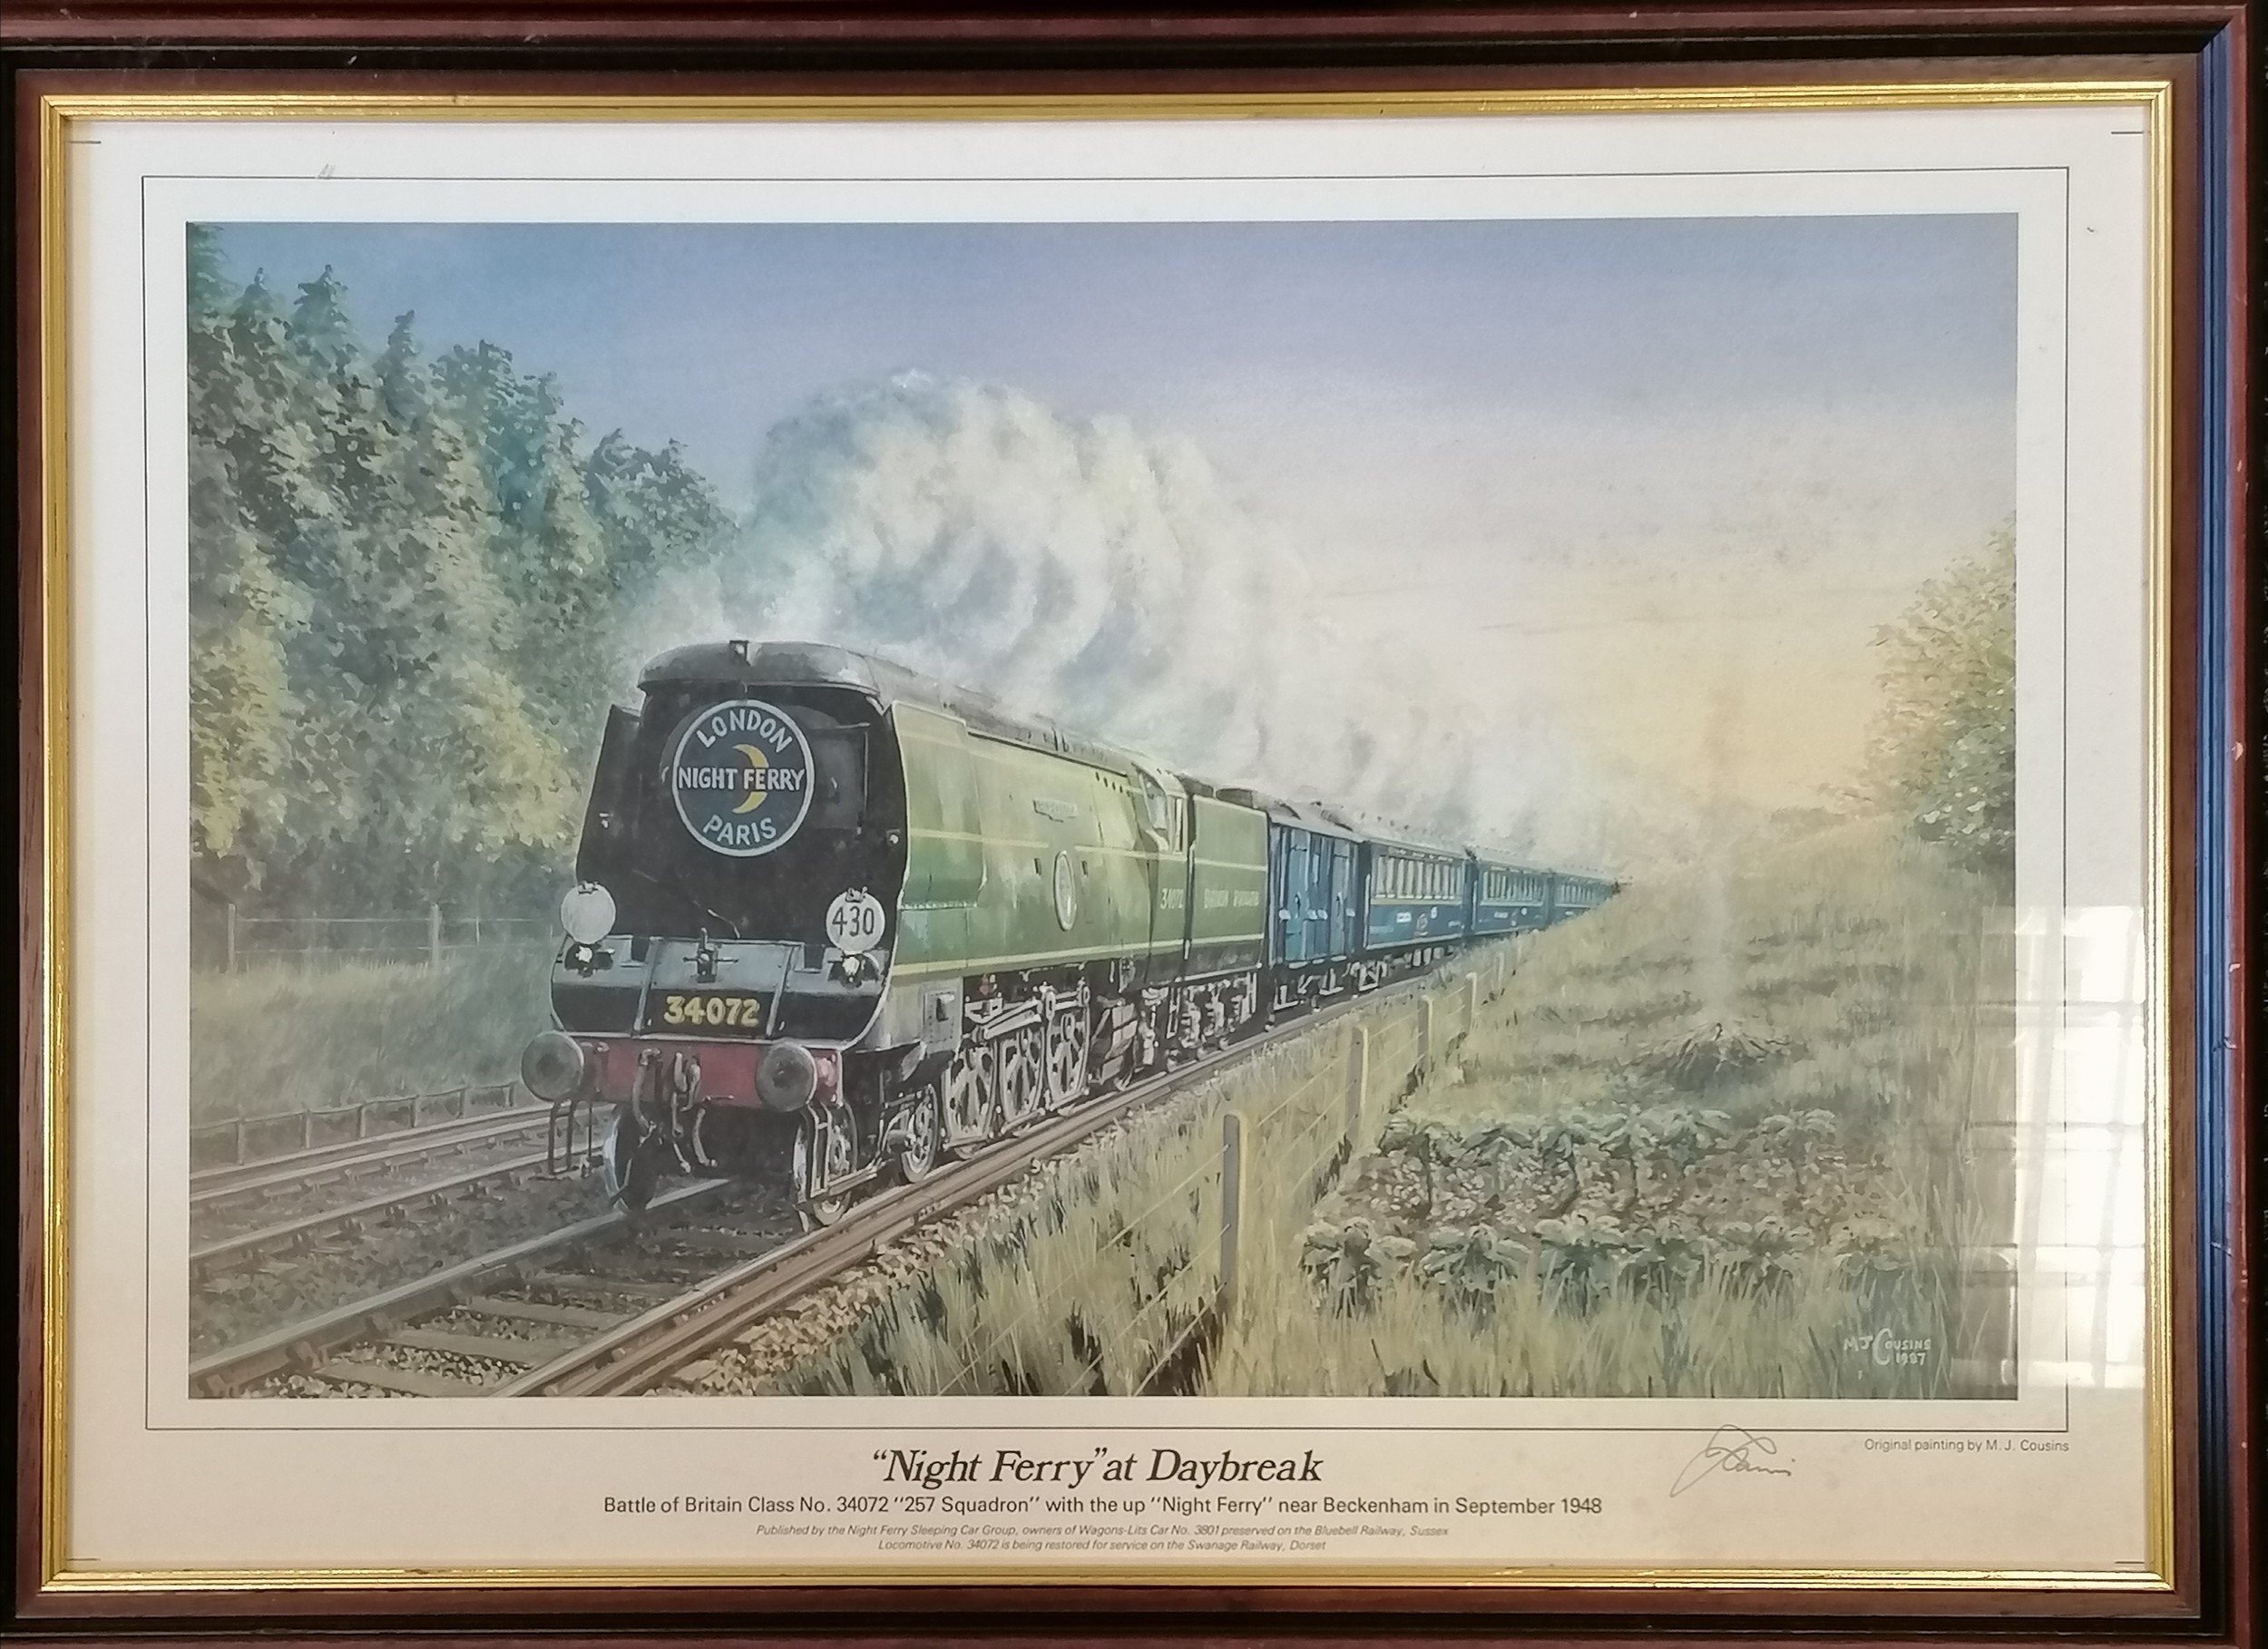 3 x railway pictures inc Night Ferry at daybreak (signed by the artist - M J Cousins) 50cm x 69cm - Image 2 of 2